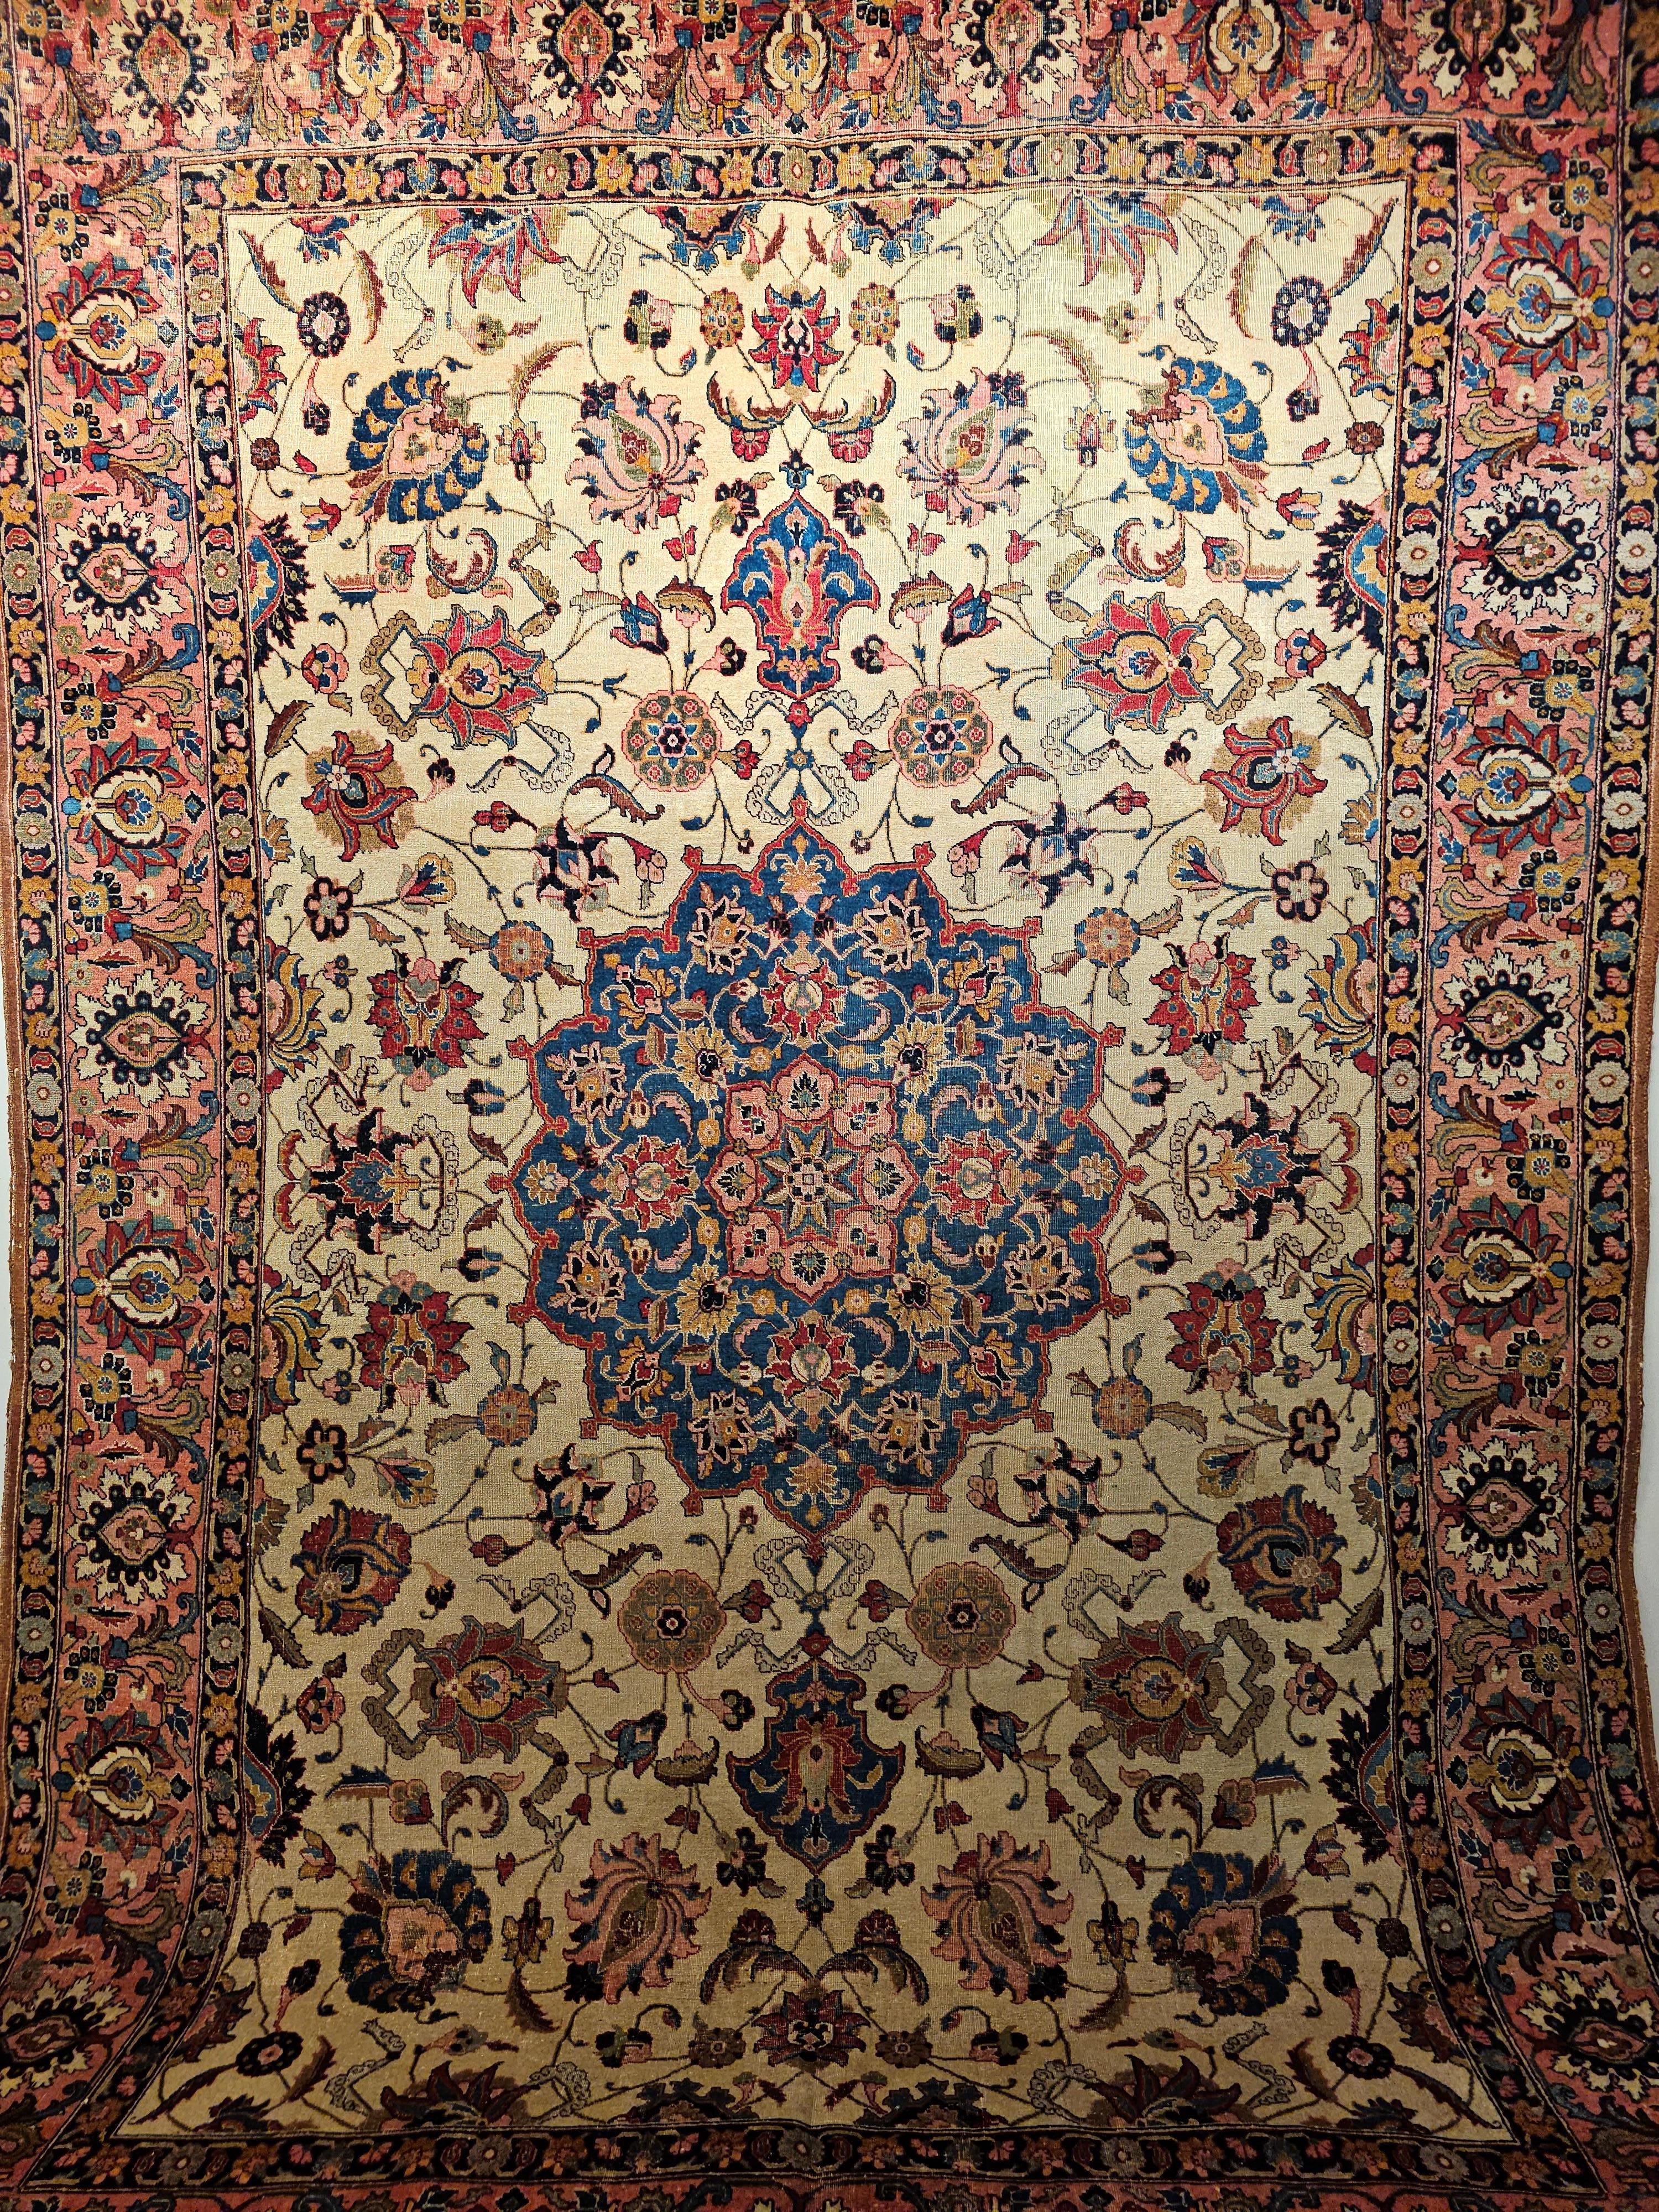 Vintage Persian Tabriz room size rug with large format floral pattern in French blue, ivory, and salmon colors. A beautiful Persian Tabriz room-size rug from the early 1900s. The rug has a wonderful design similar to the rugs woven during the 16th